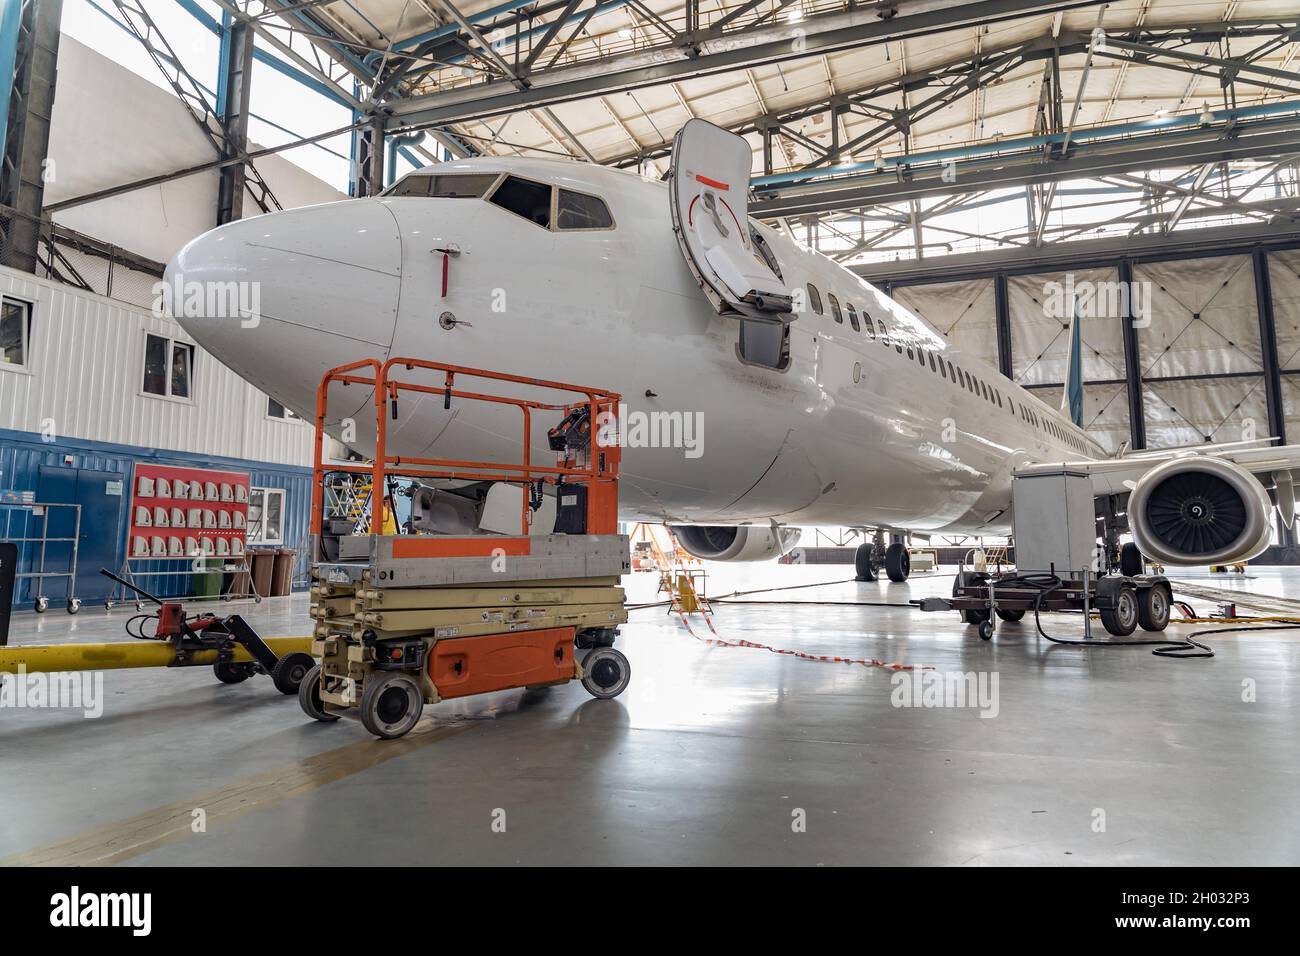 Passenger aircraft on maintenance of engine and fuselage repair in hangar Stock Photo